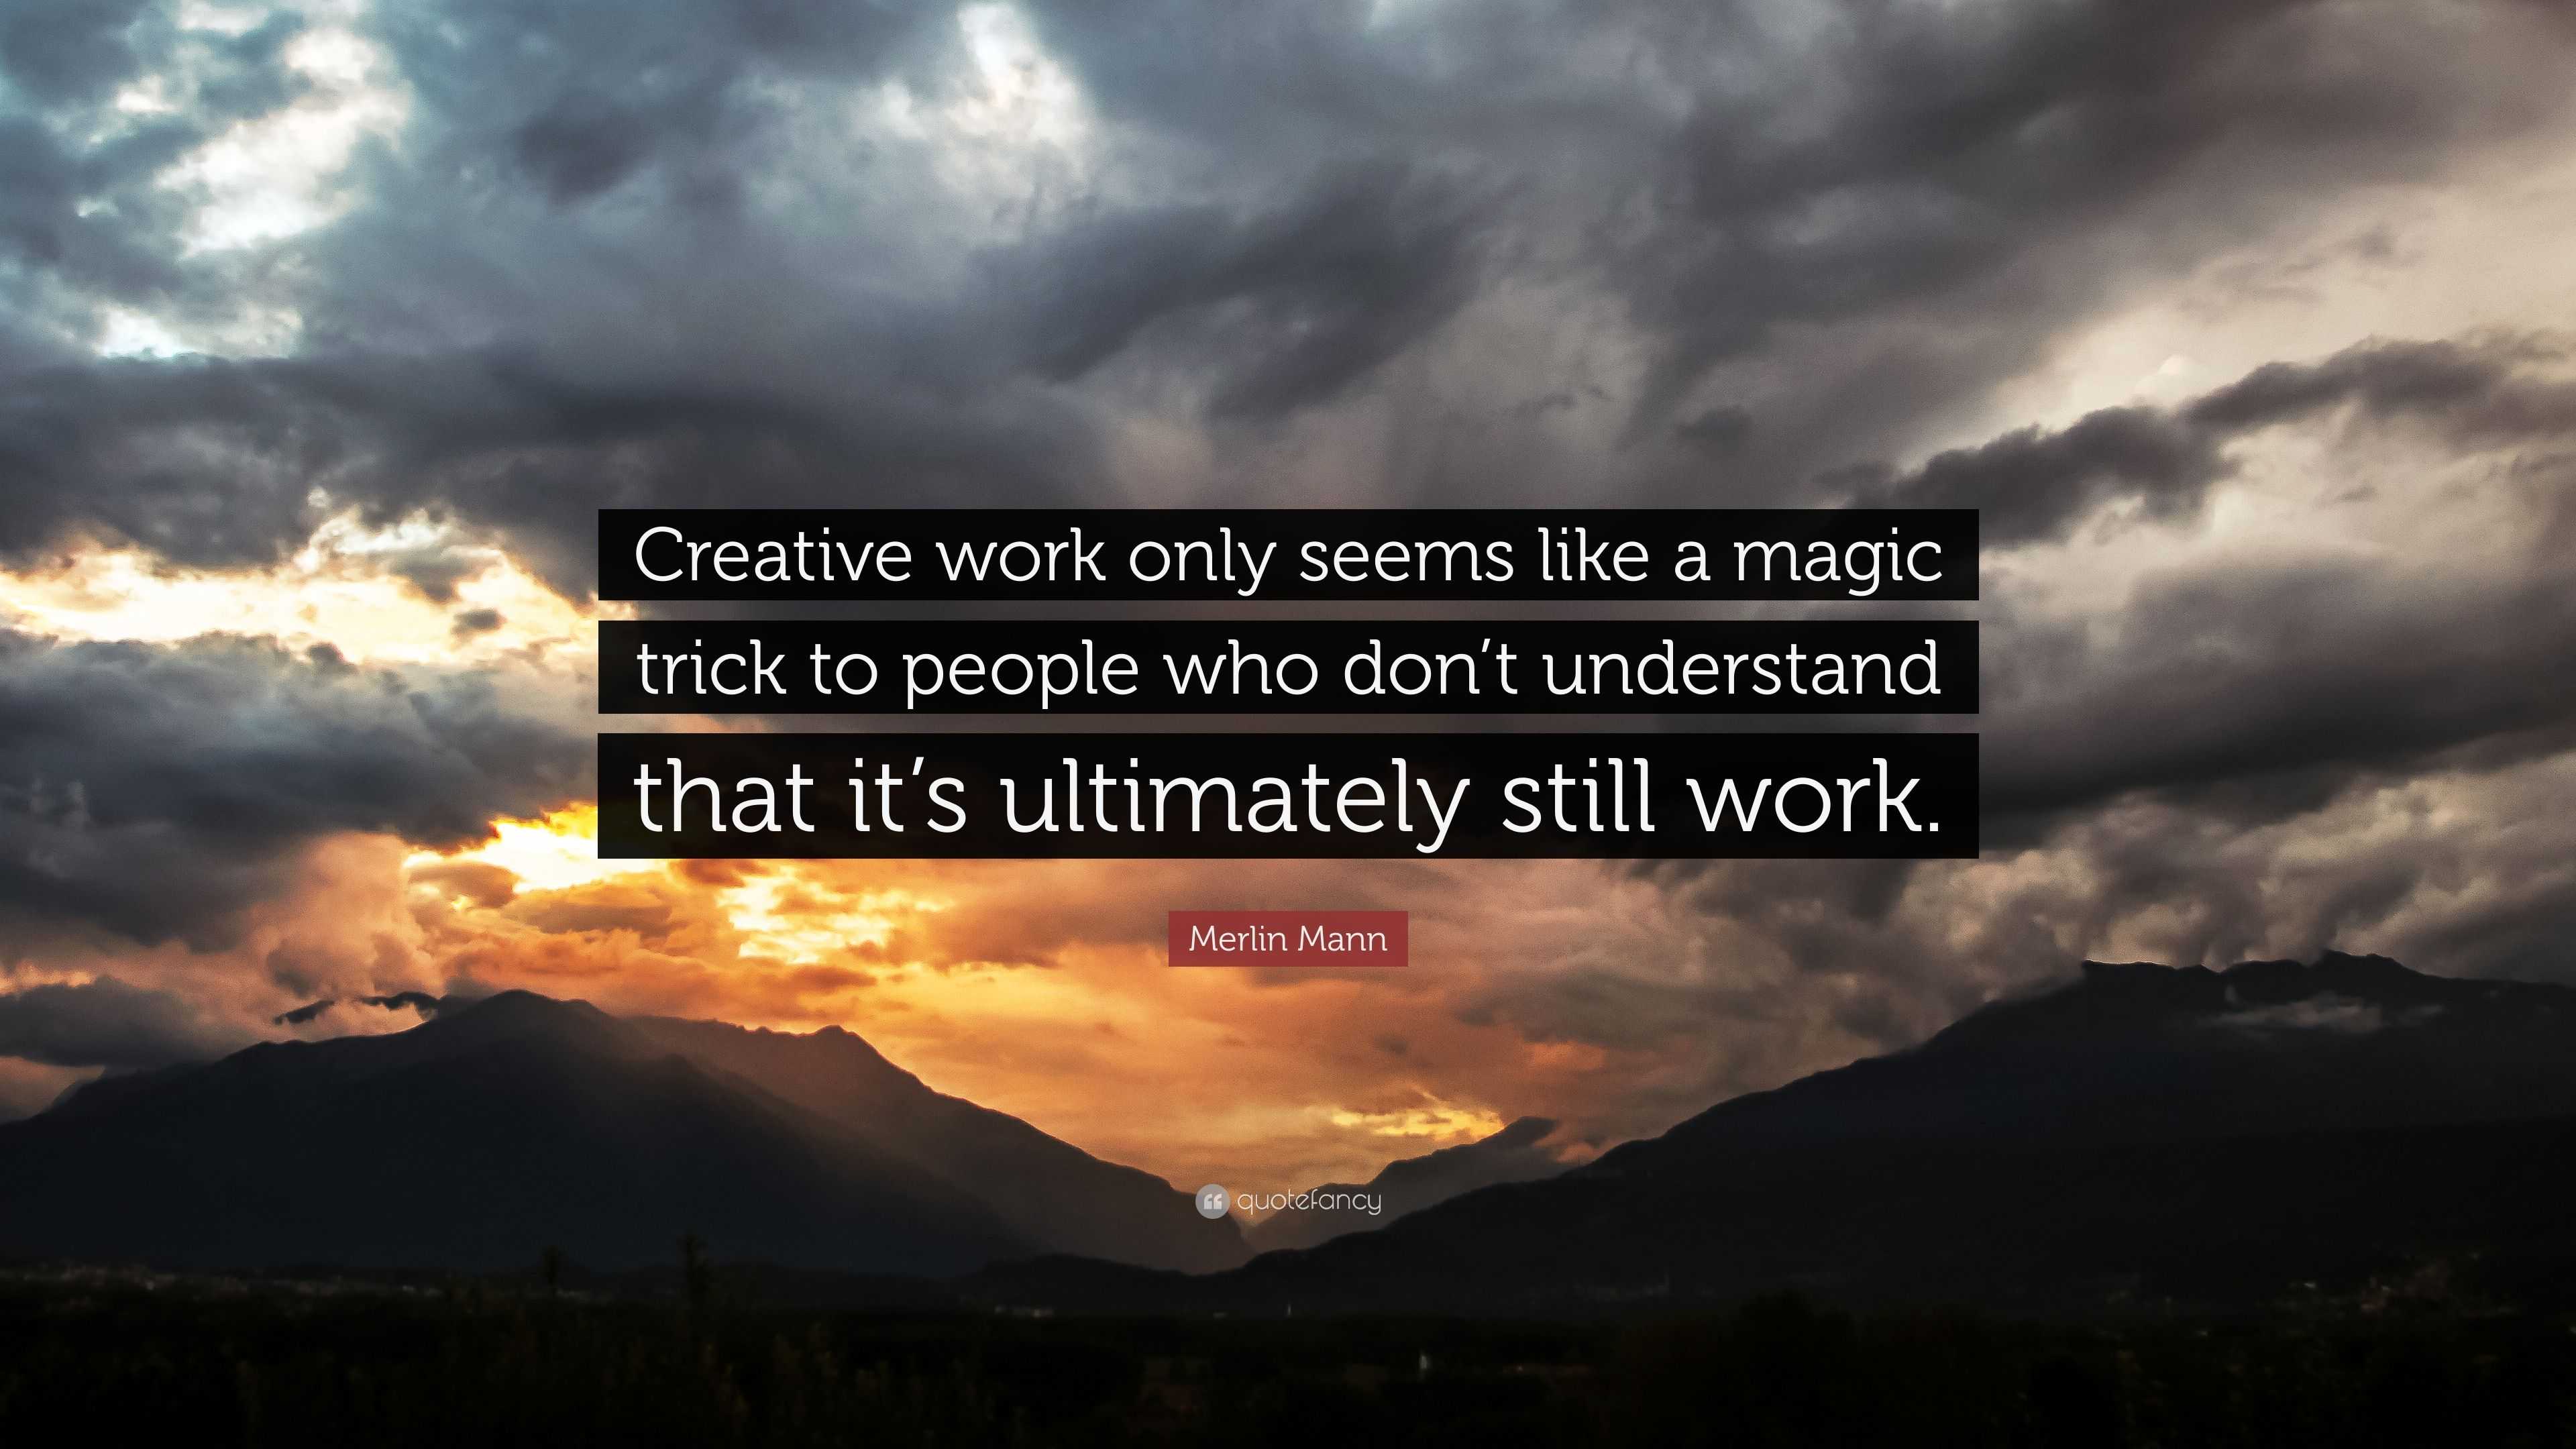 Merlin Mann Quote: “Creative work only seems like a magic trick to 